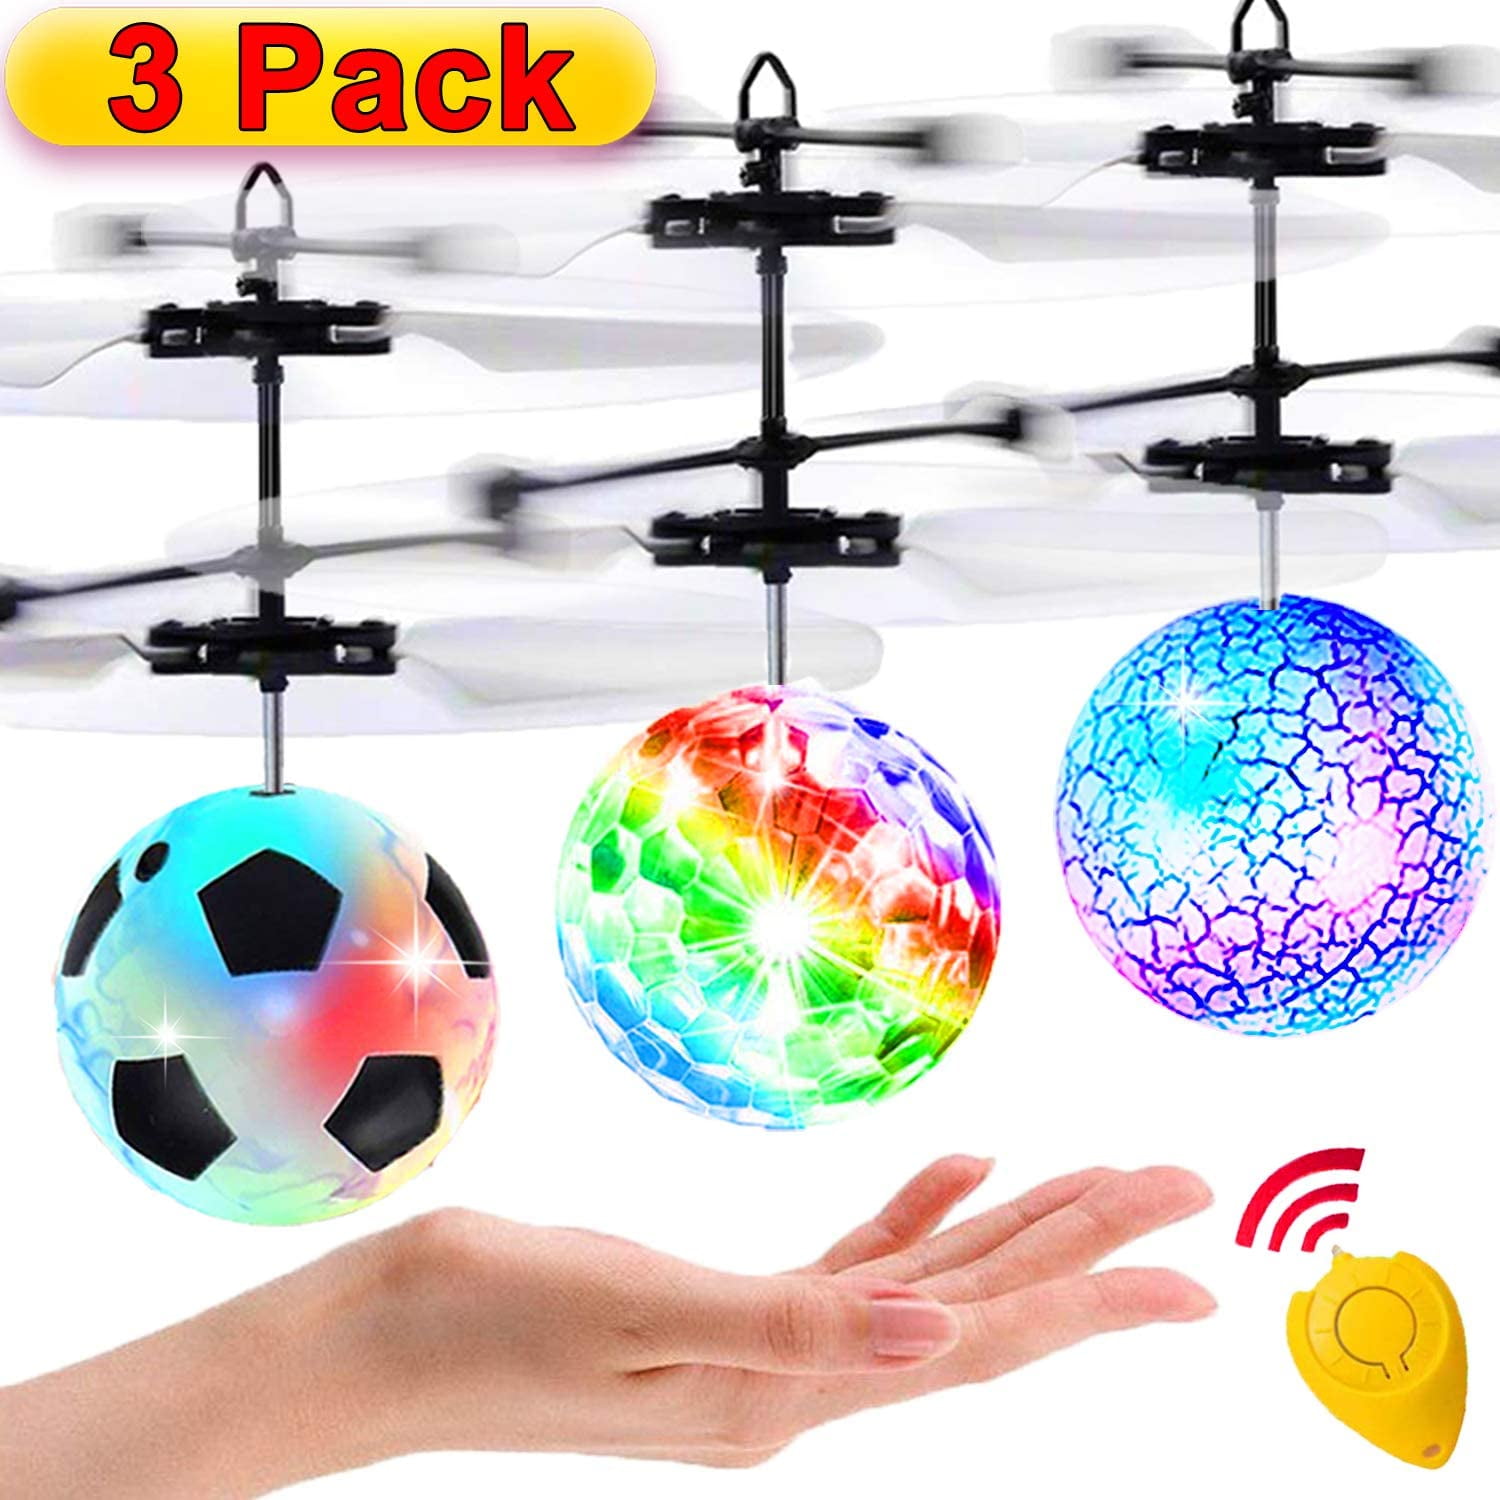 RC infrared Induction Helicopter Ball with Rainbow Shinning LED Lights and Inductive Control for Kids Bakros Flying Ball 